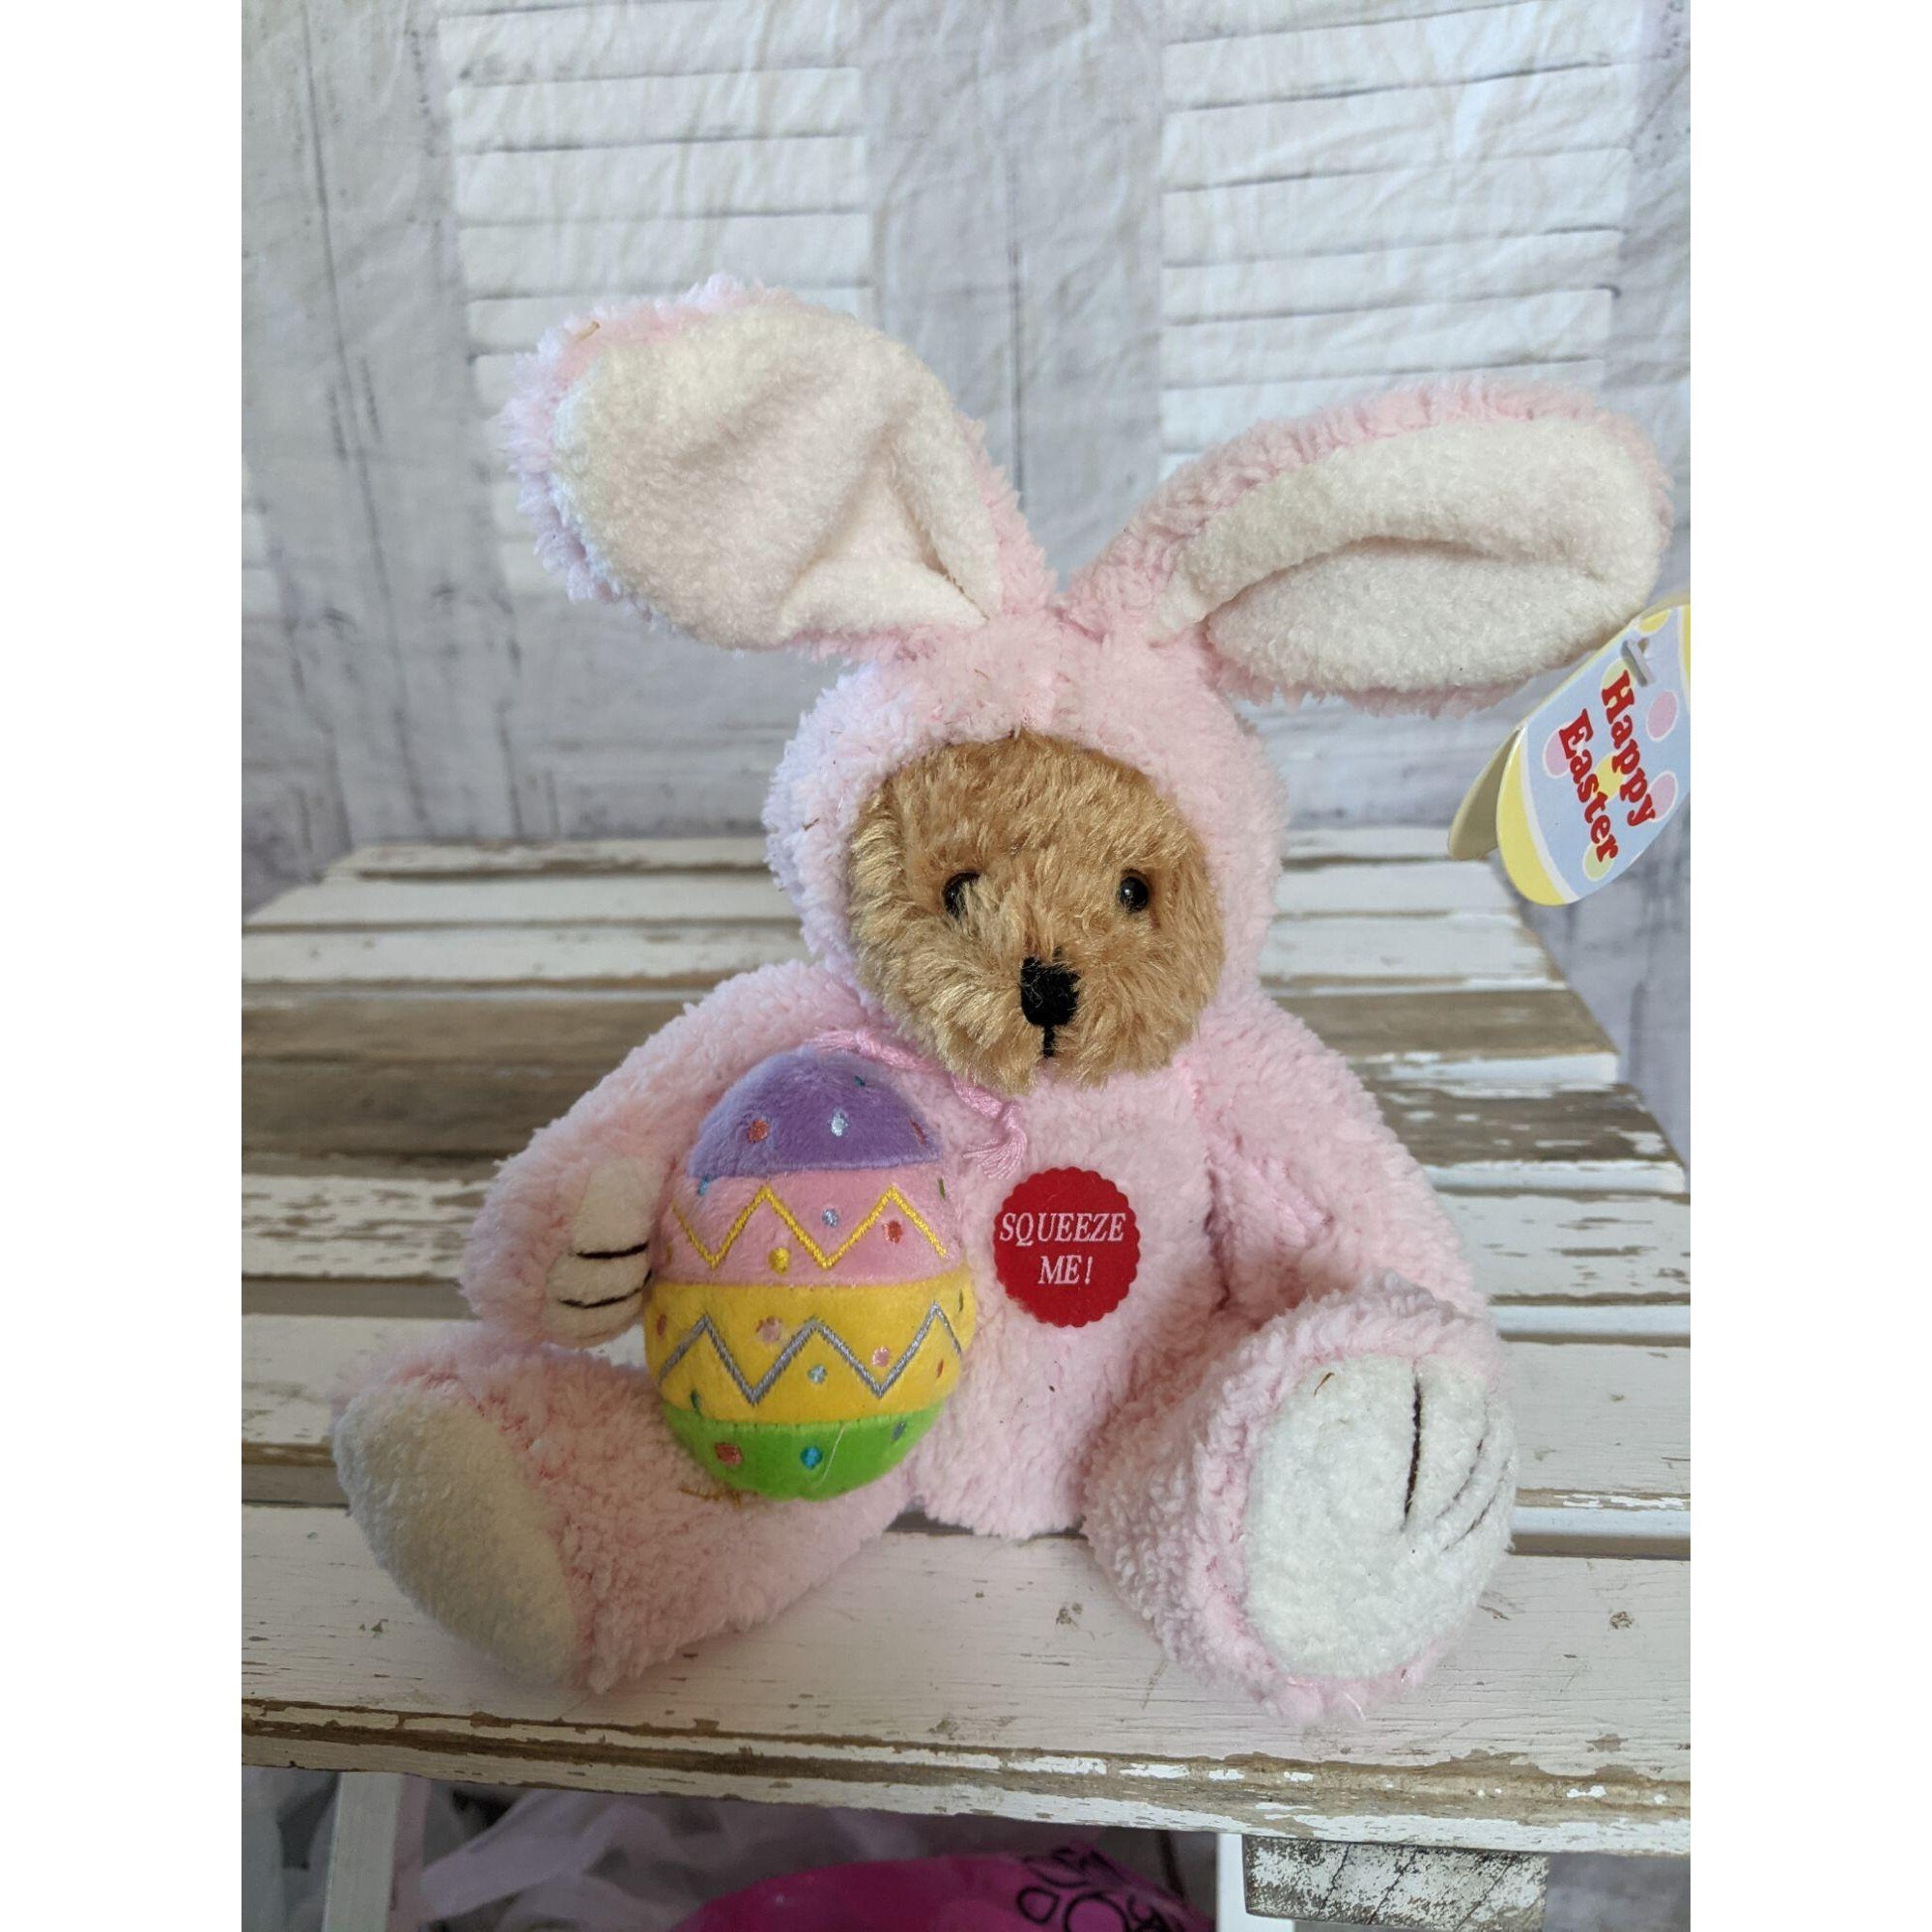 Plushland 6 inch Easter Bunny Stuffed Animals Plush small easter bunny